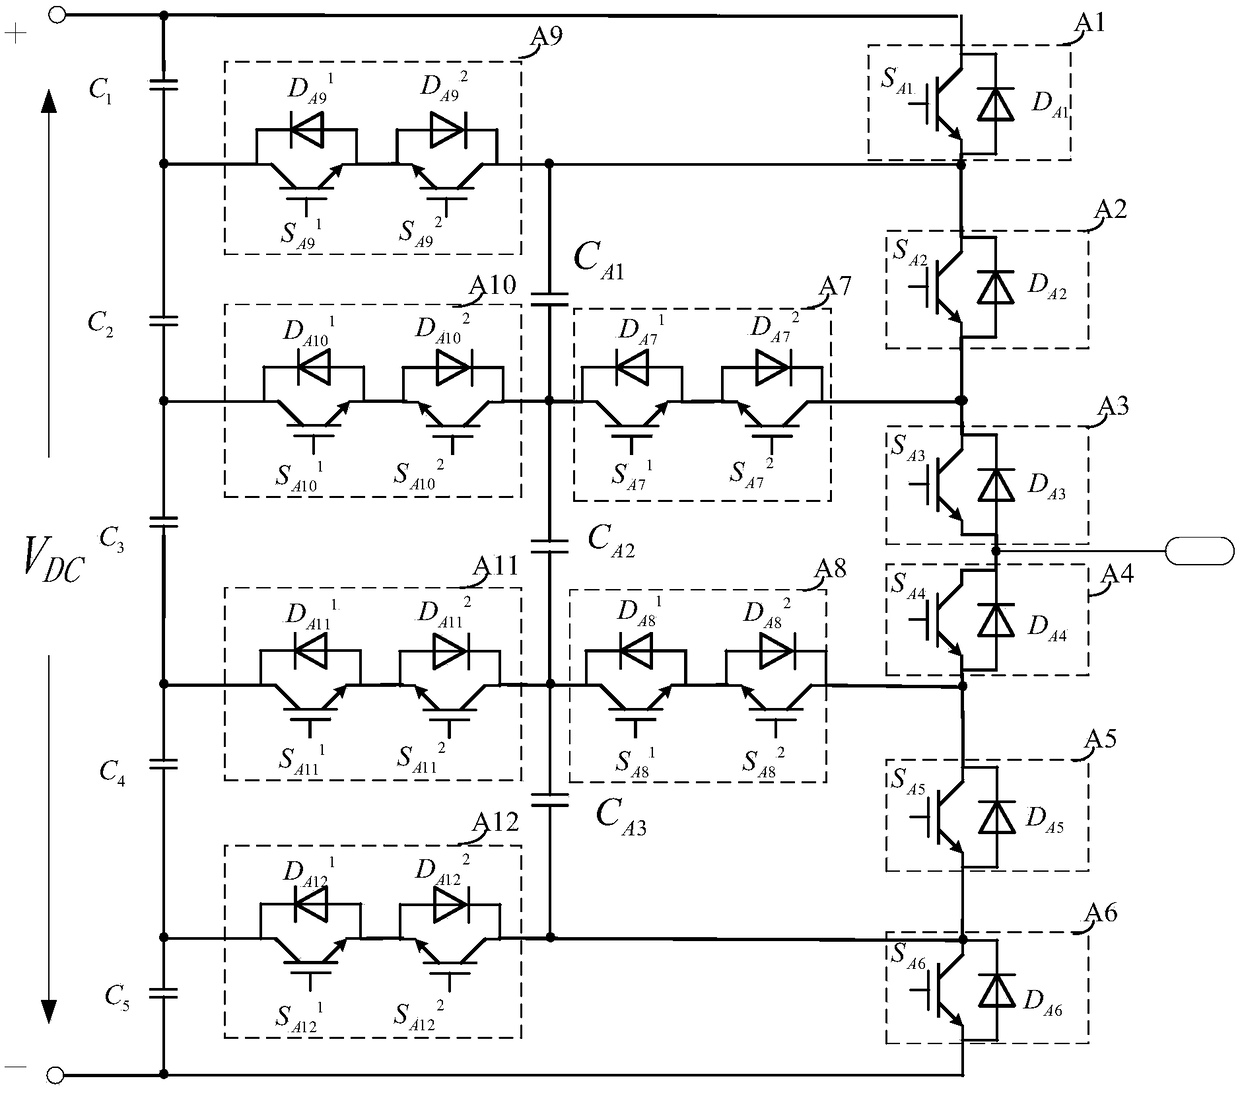 A six-level circuit topology for a power conversion system